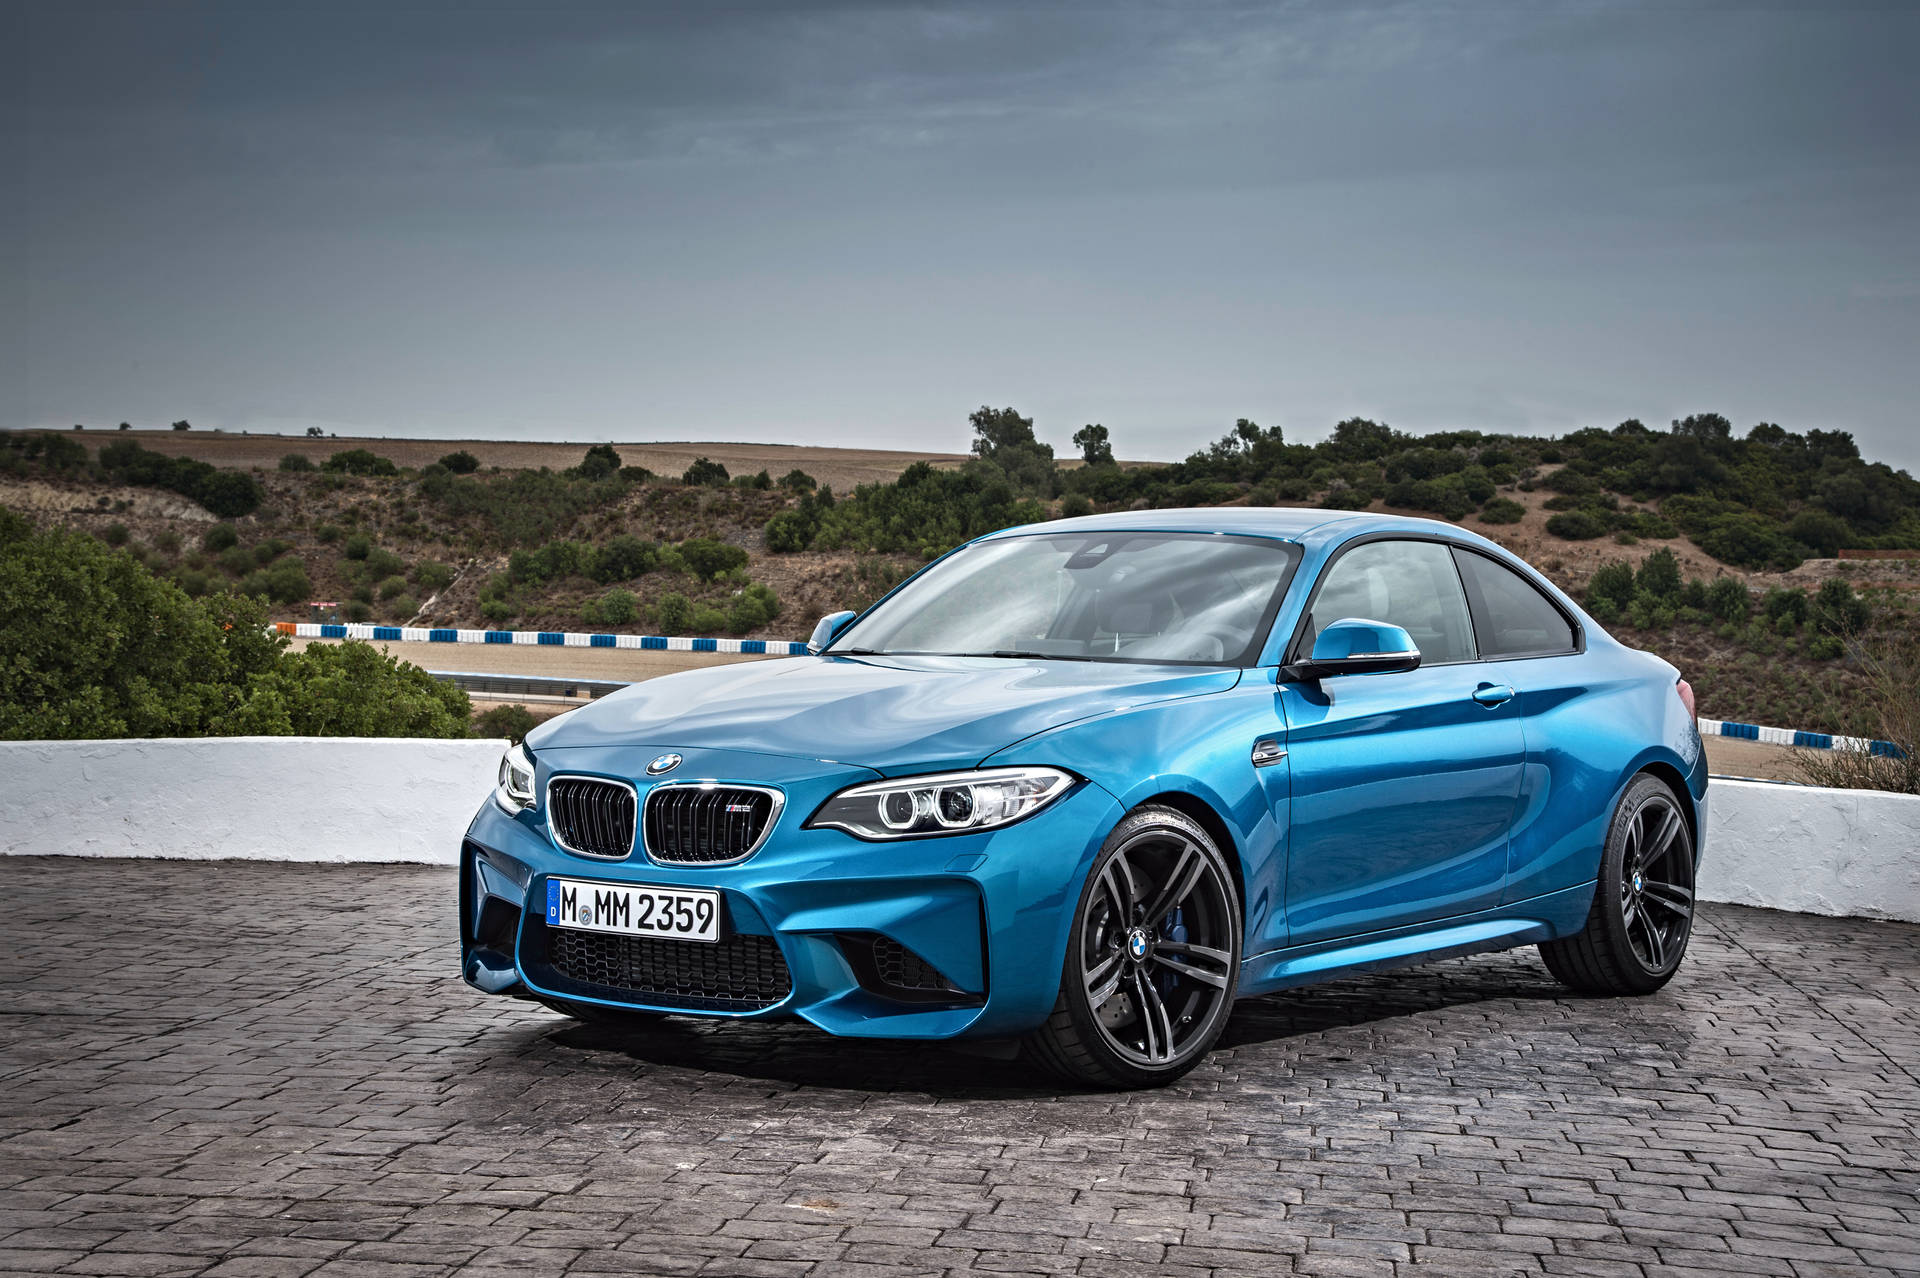 Cruise along the mountain roads in a Blue BMW F87 Wallpaper